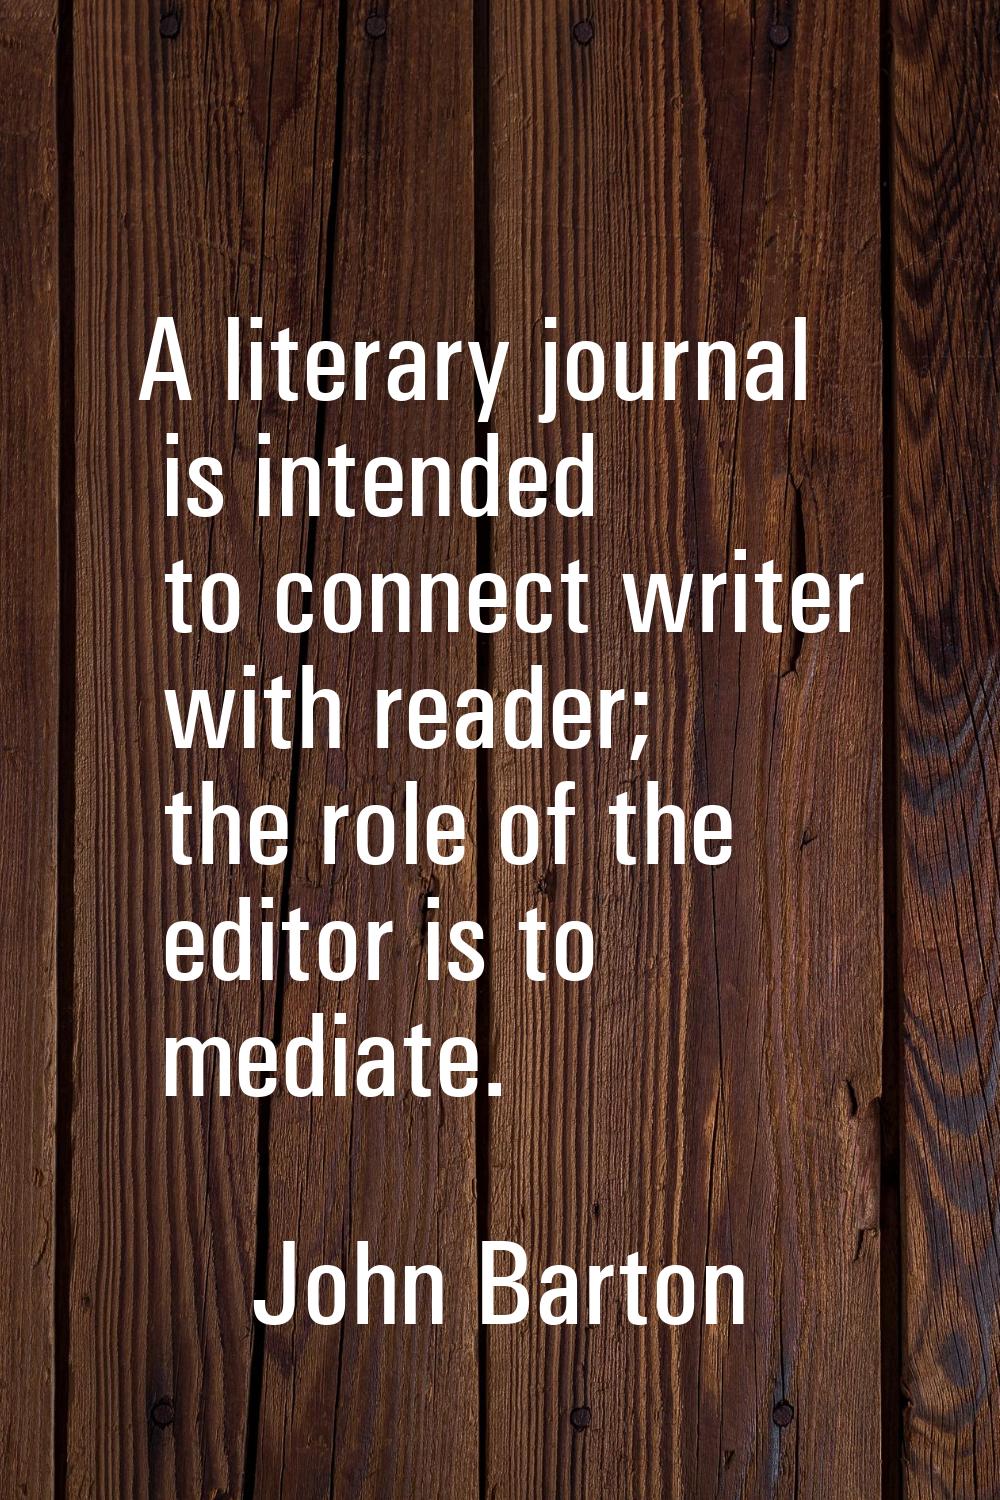 A literary journal is intended to connect writer with reader; the role of the editor is to mediate.